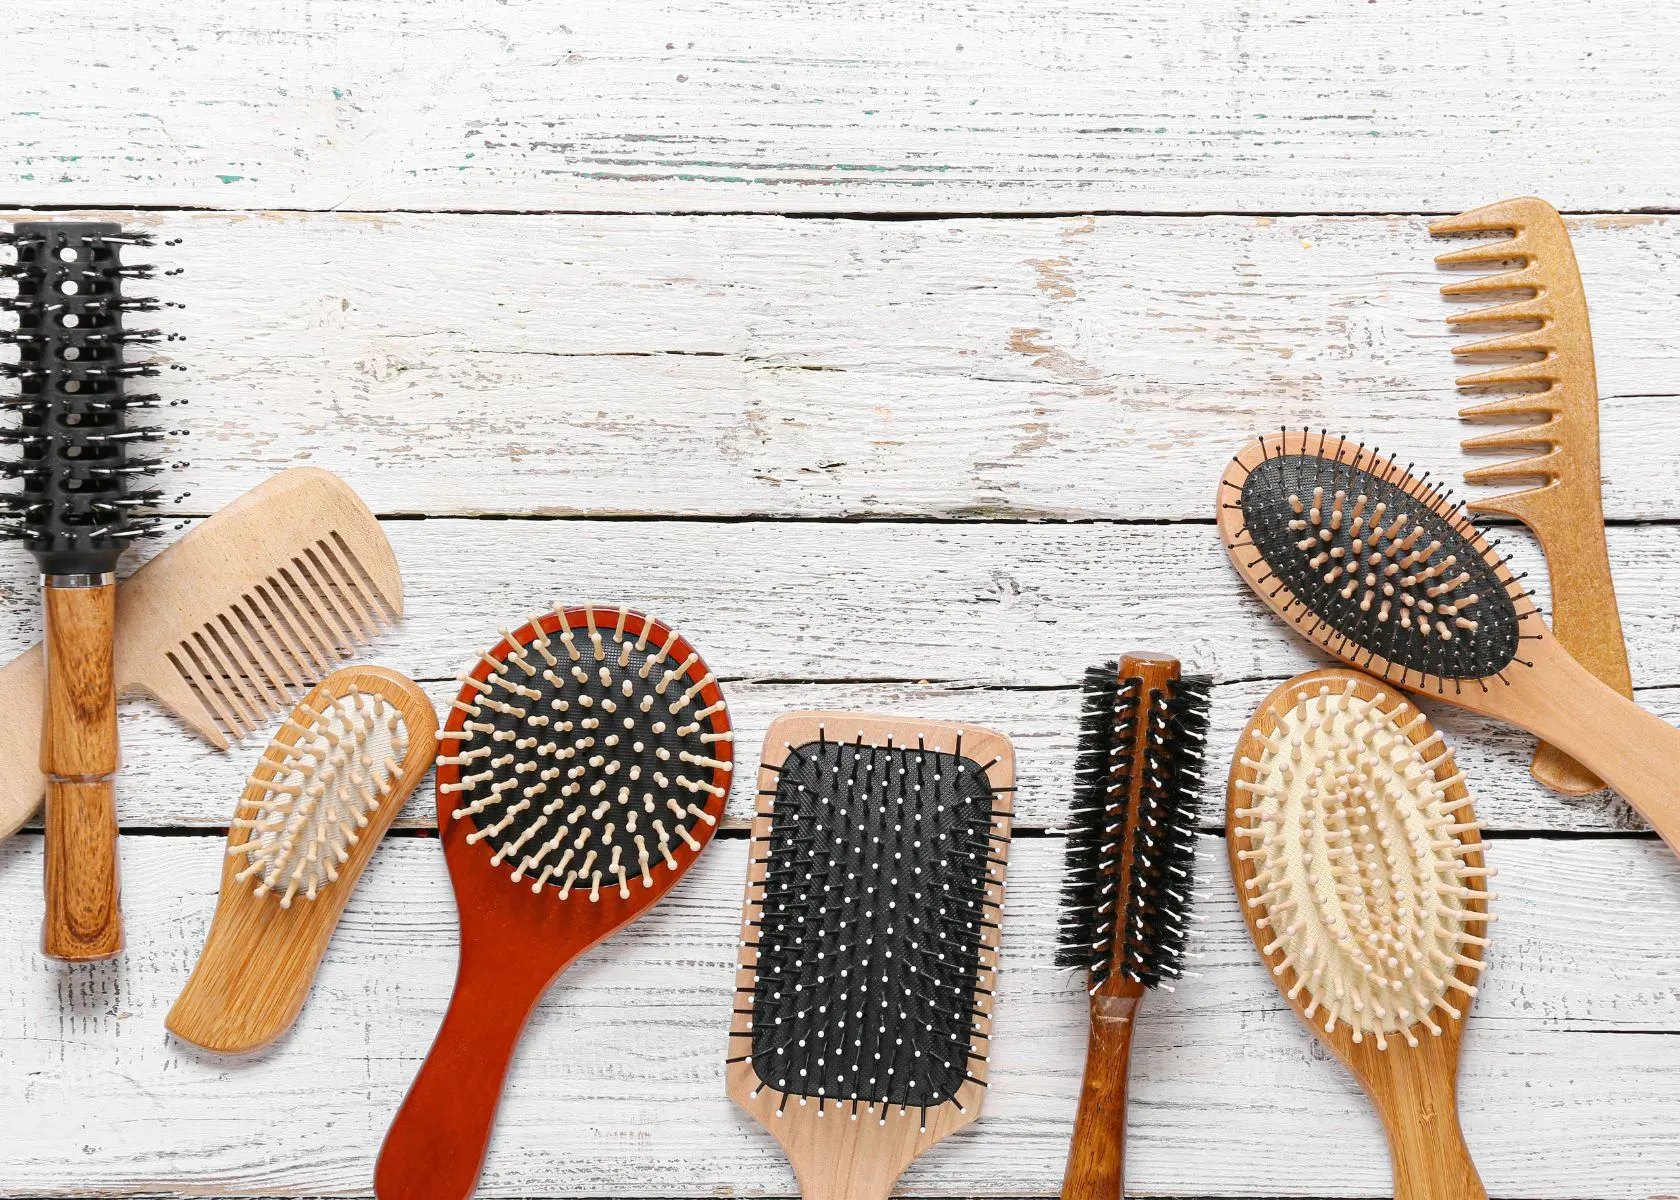 What Differentiates This Tool from Regular Combs and Brushes?